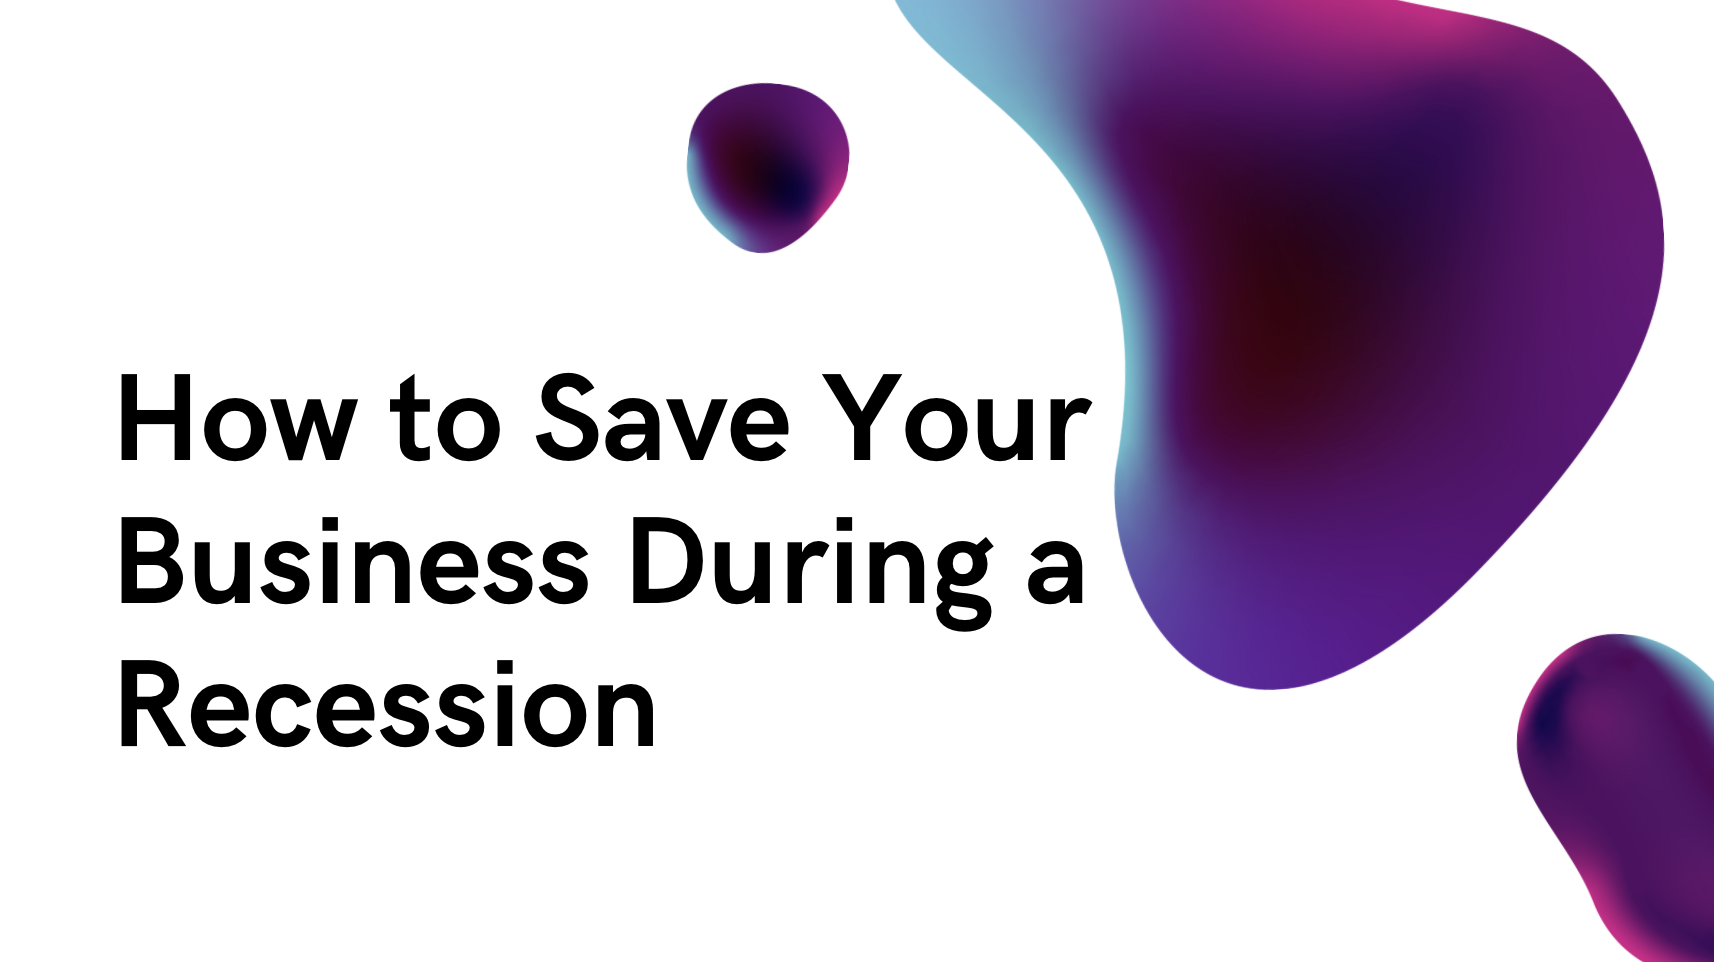 How to Save Your Business During a Recession